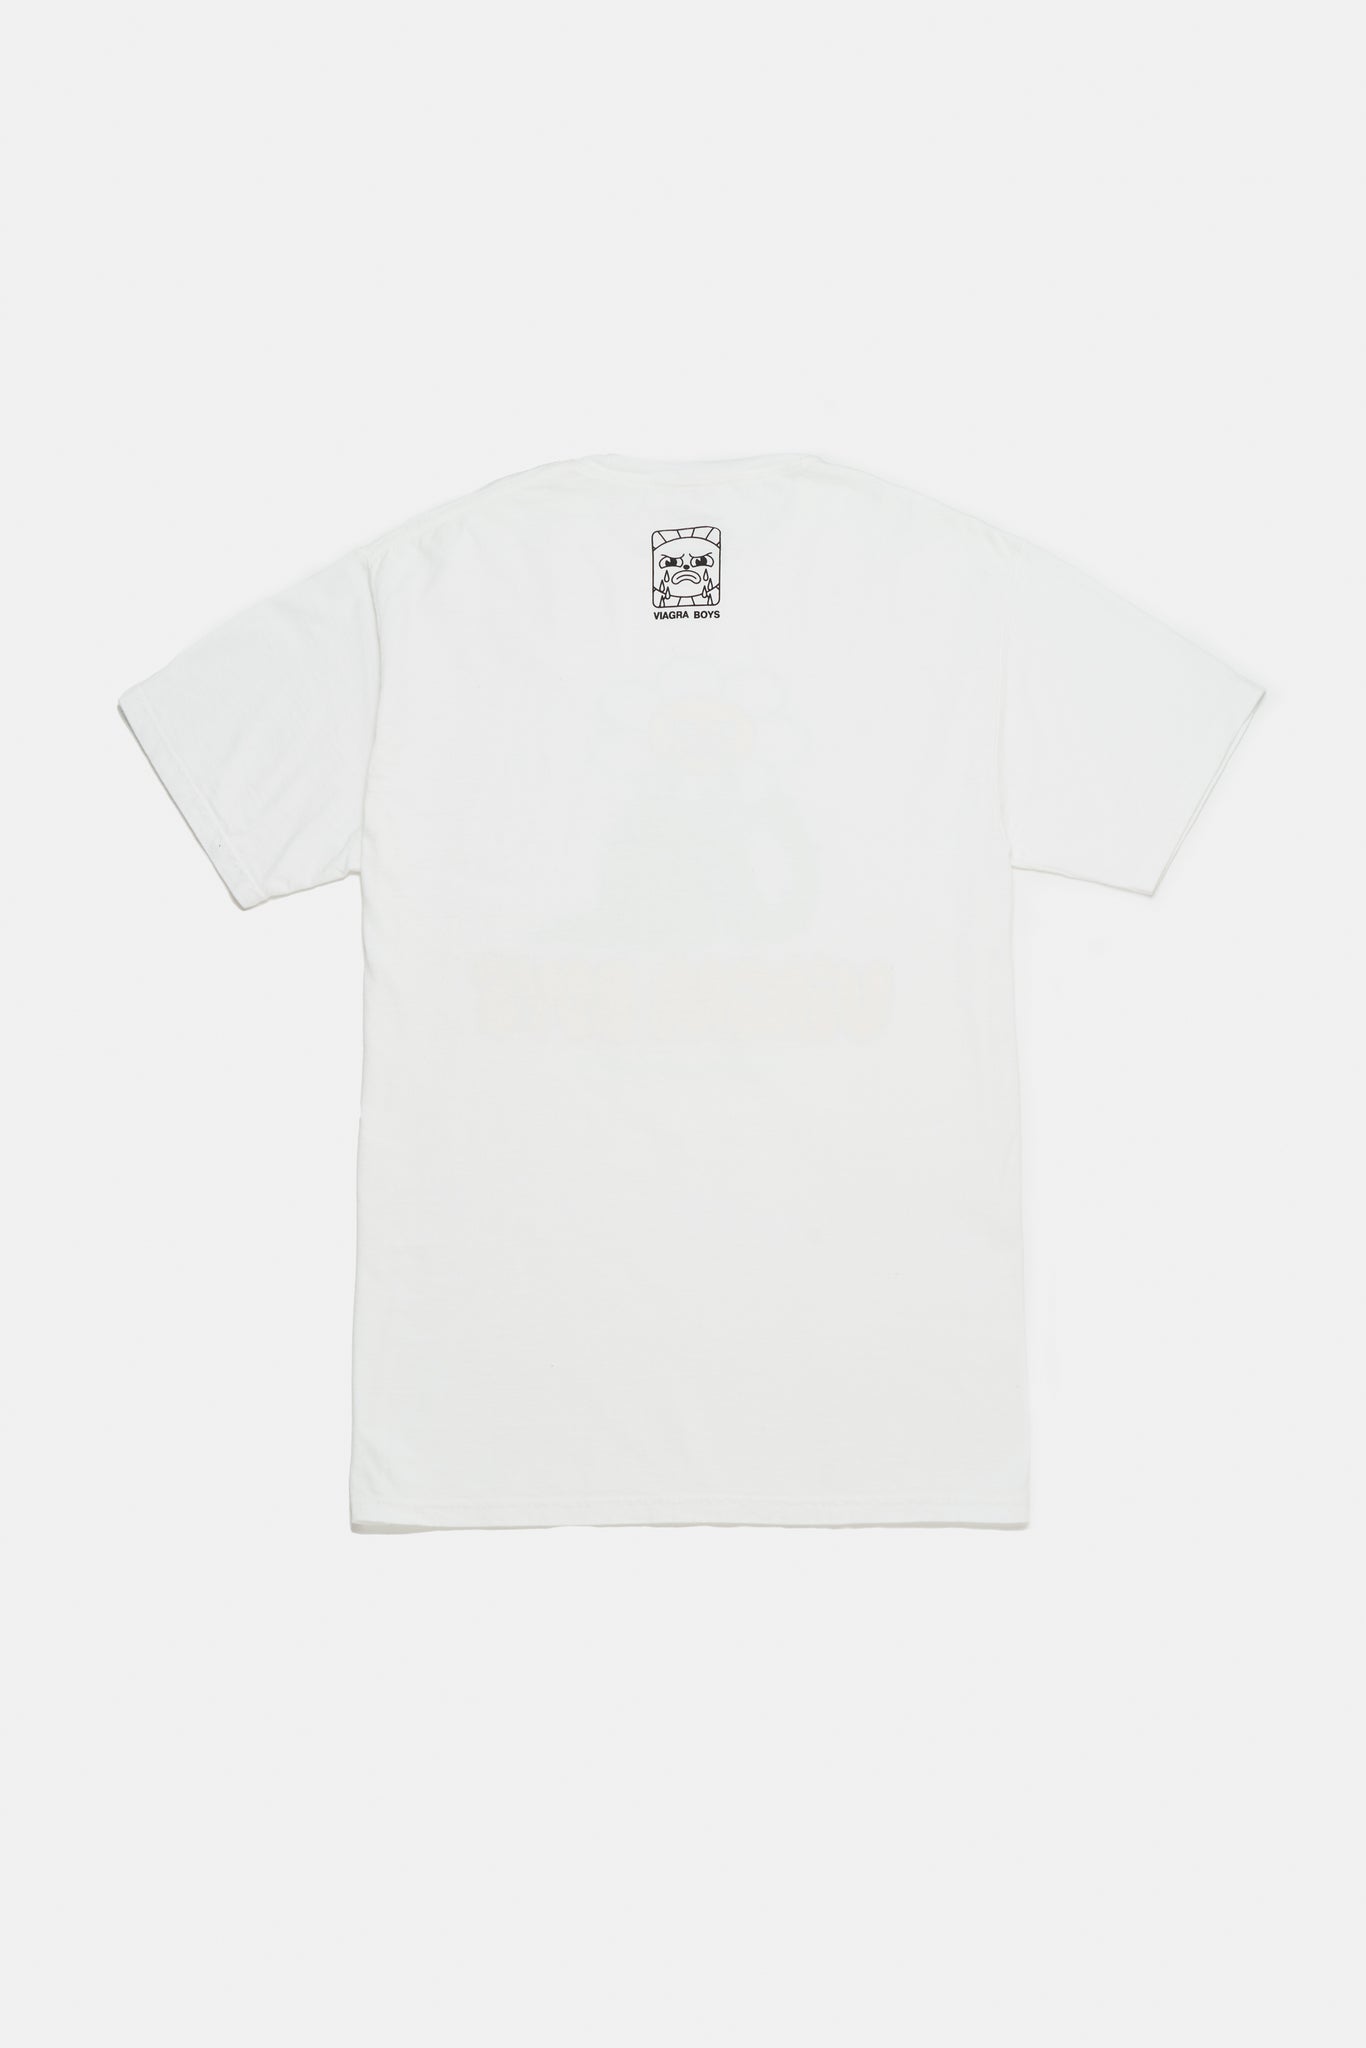 Wither T-shirt (Tour edition) (White)